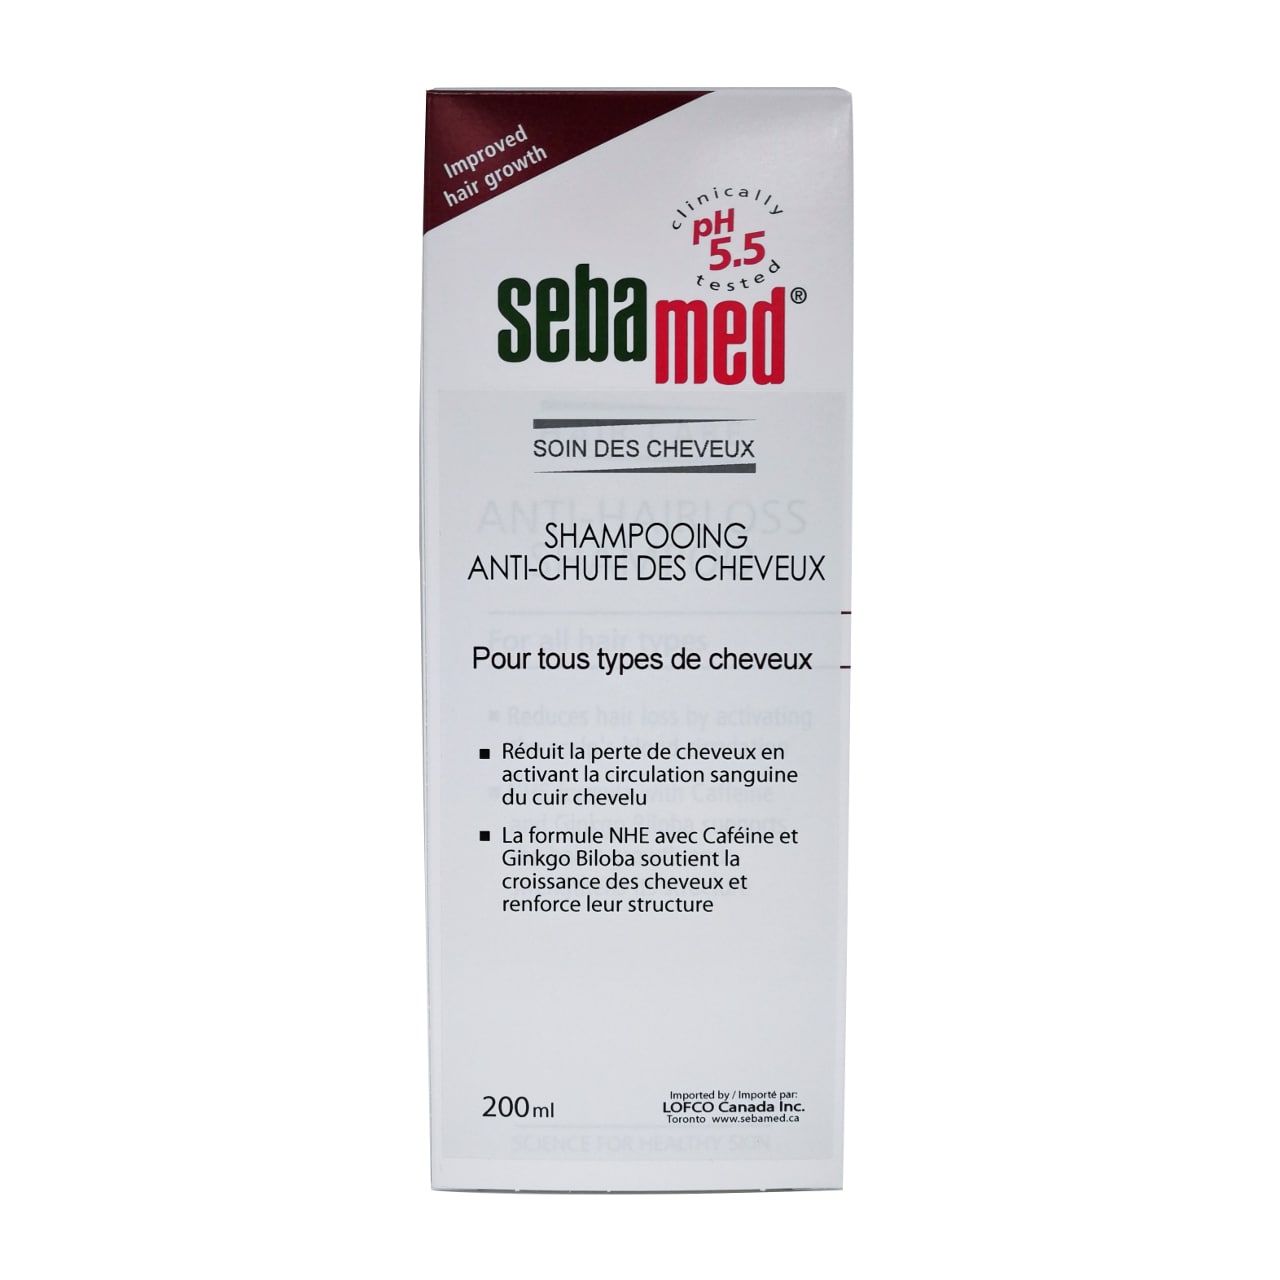 Product label for Sebamed Hair Care Anti-Hairloss Shampoo in French